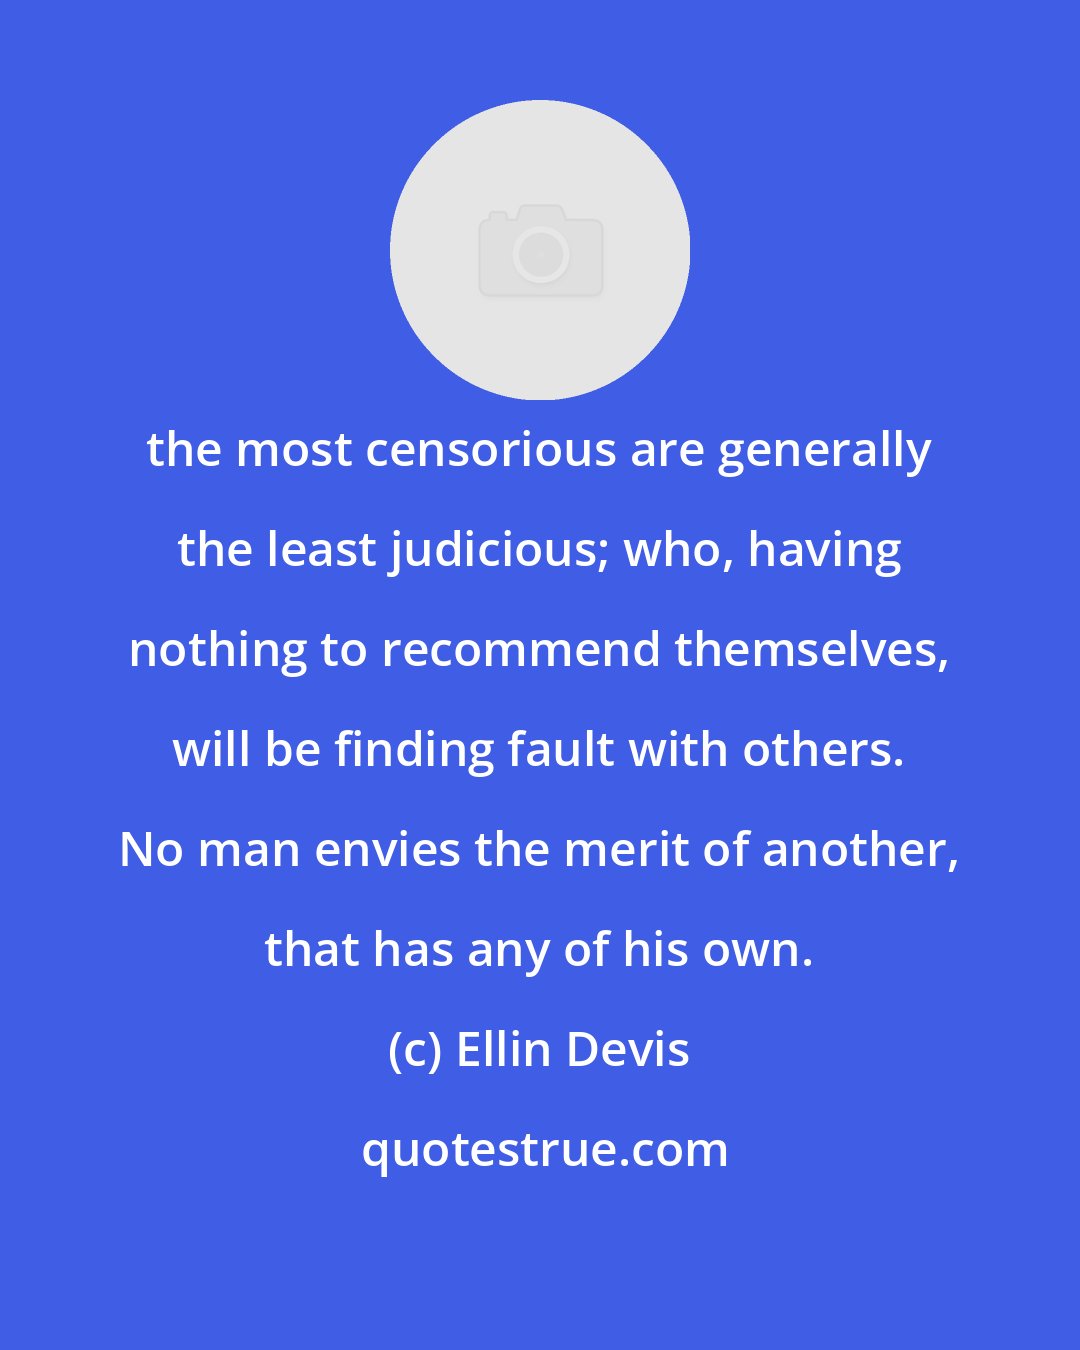 Ellin Devis: the most censorious are generally the least judicious; who, having nothing to recommend themselves, will be finding fault with others. No man envies the merit of another, that has any of his own.